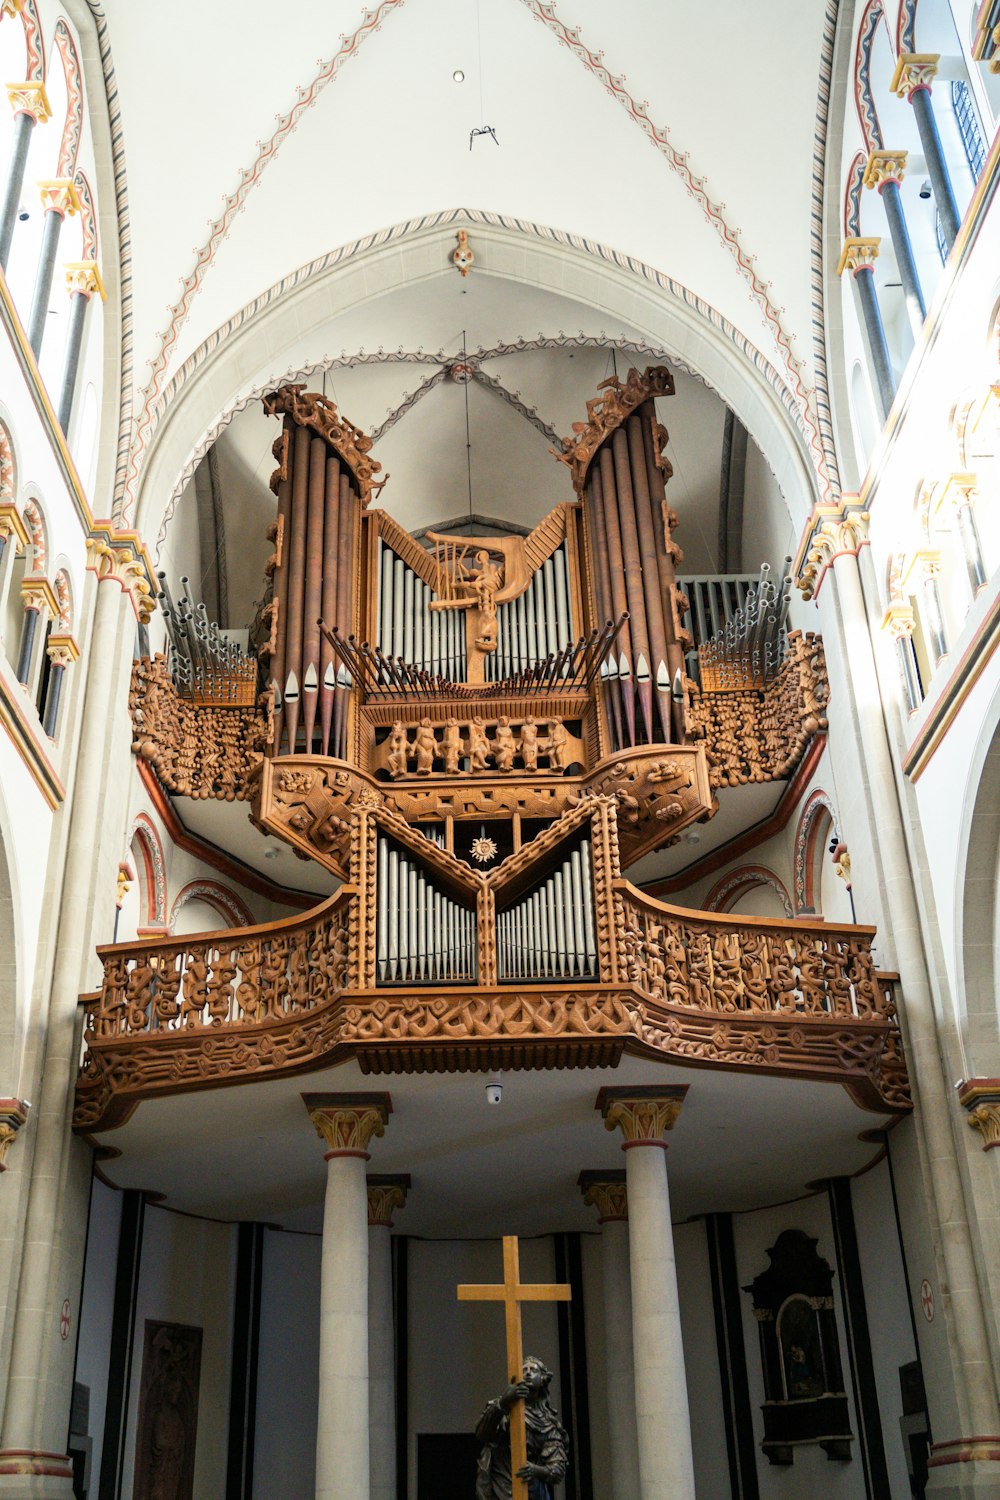 a large wooden pipe organ in a church